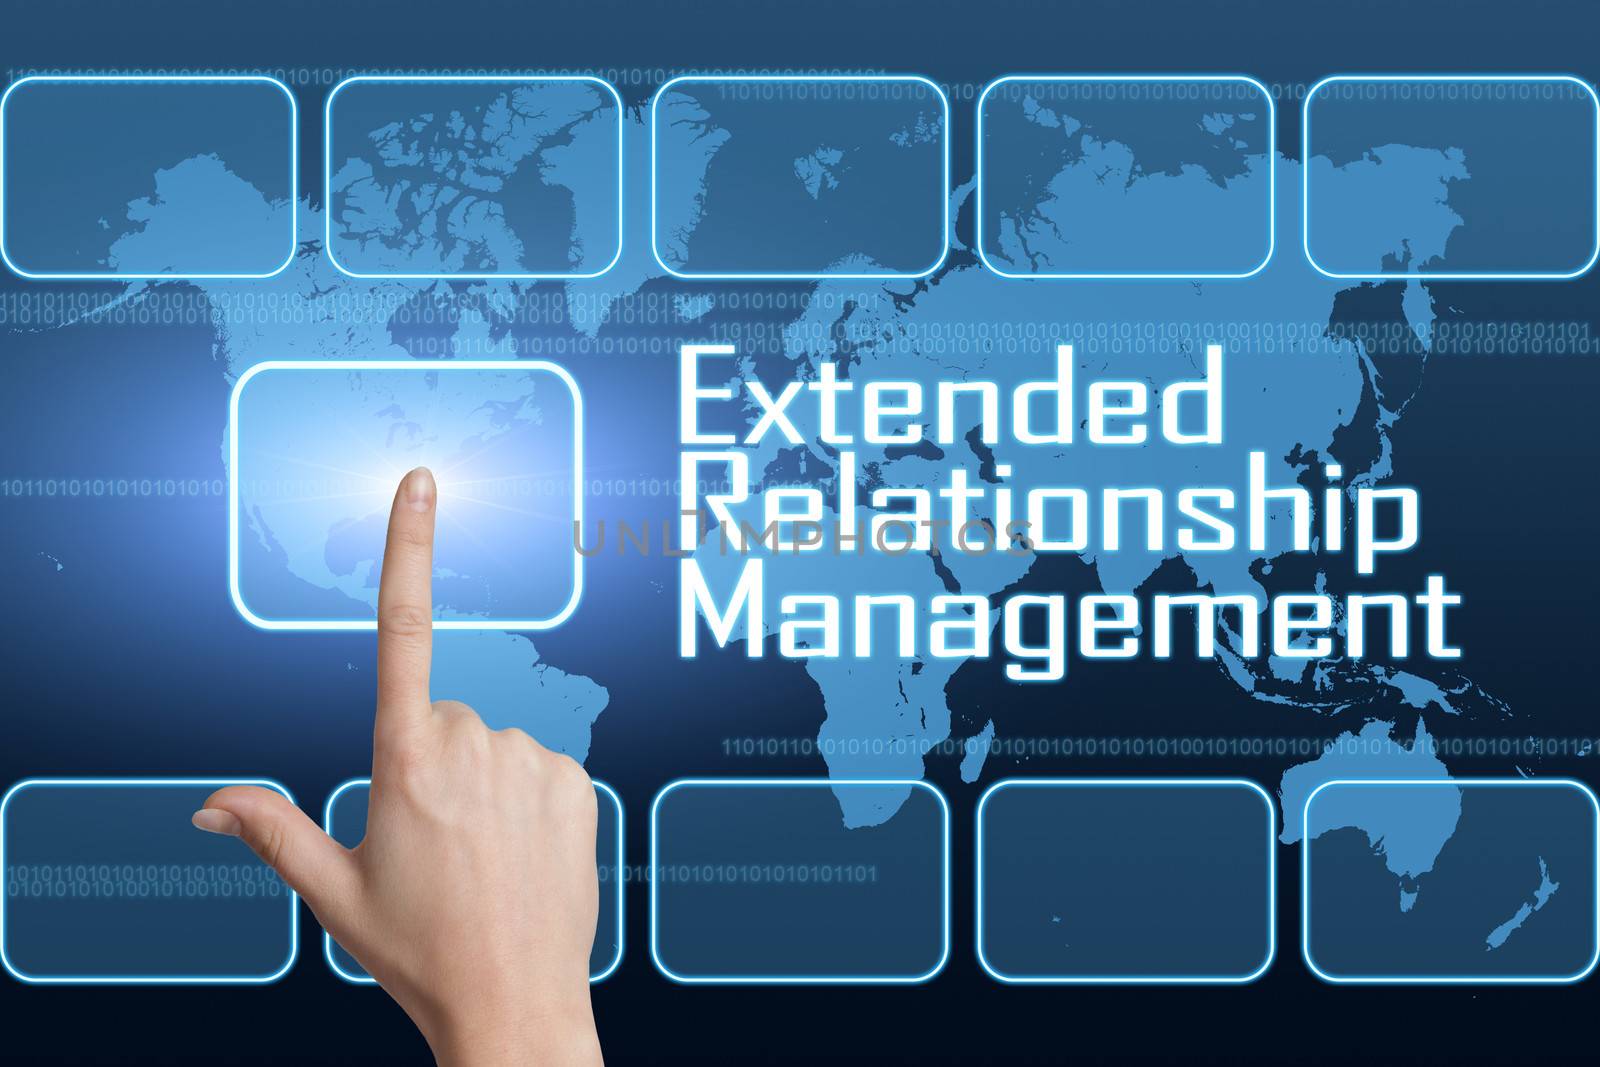 Extended Relationship Management concept with interface and world map on blue background